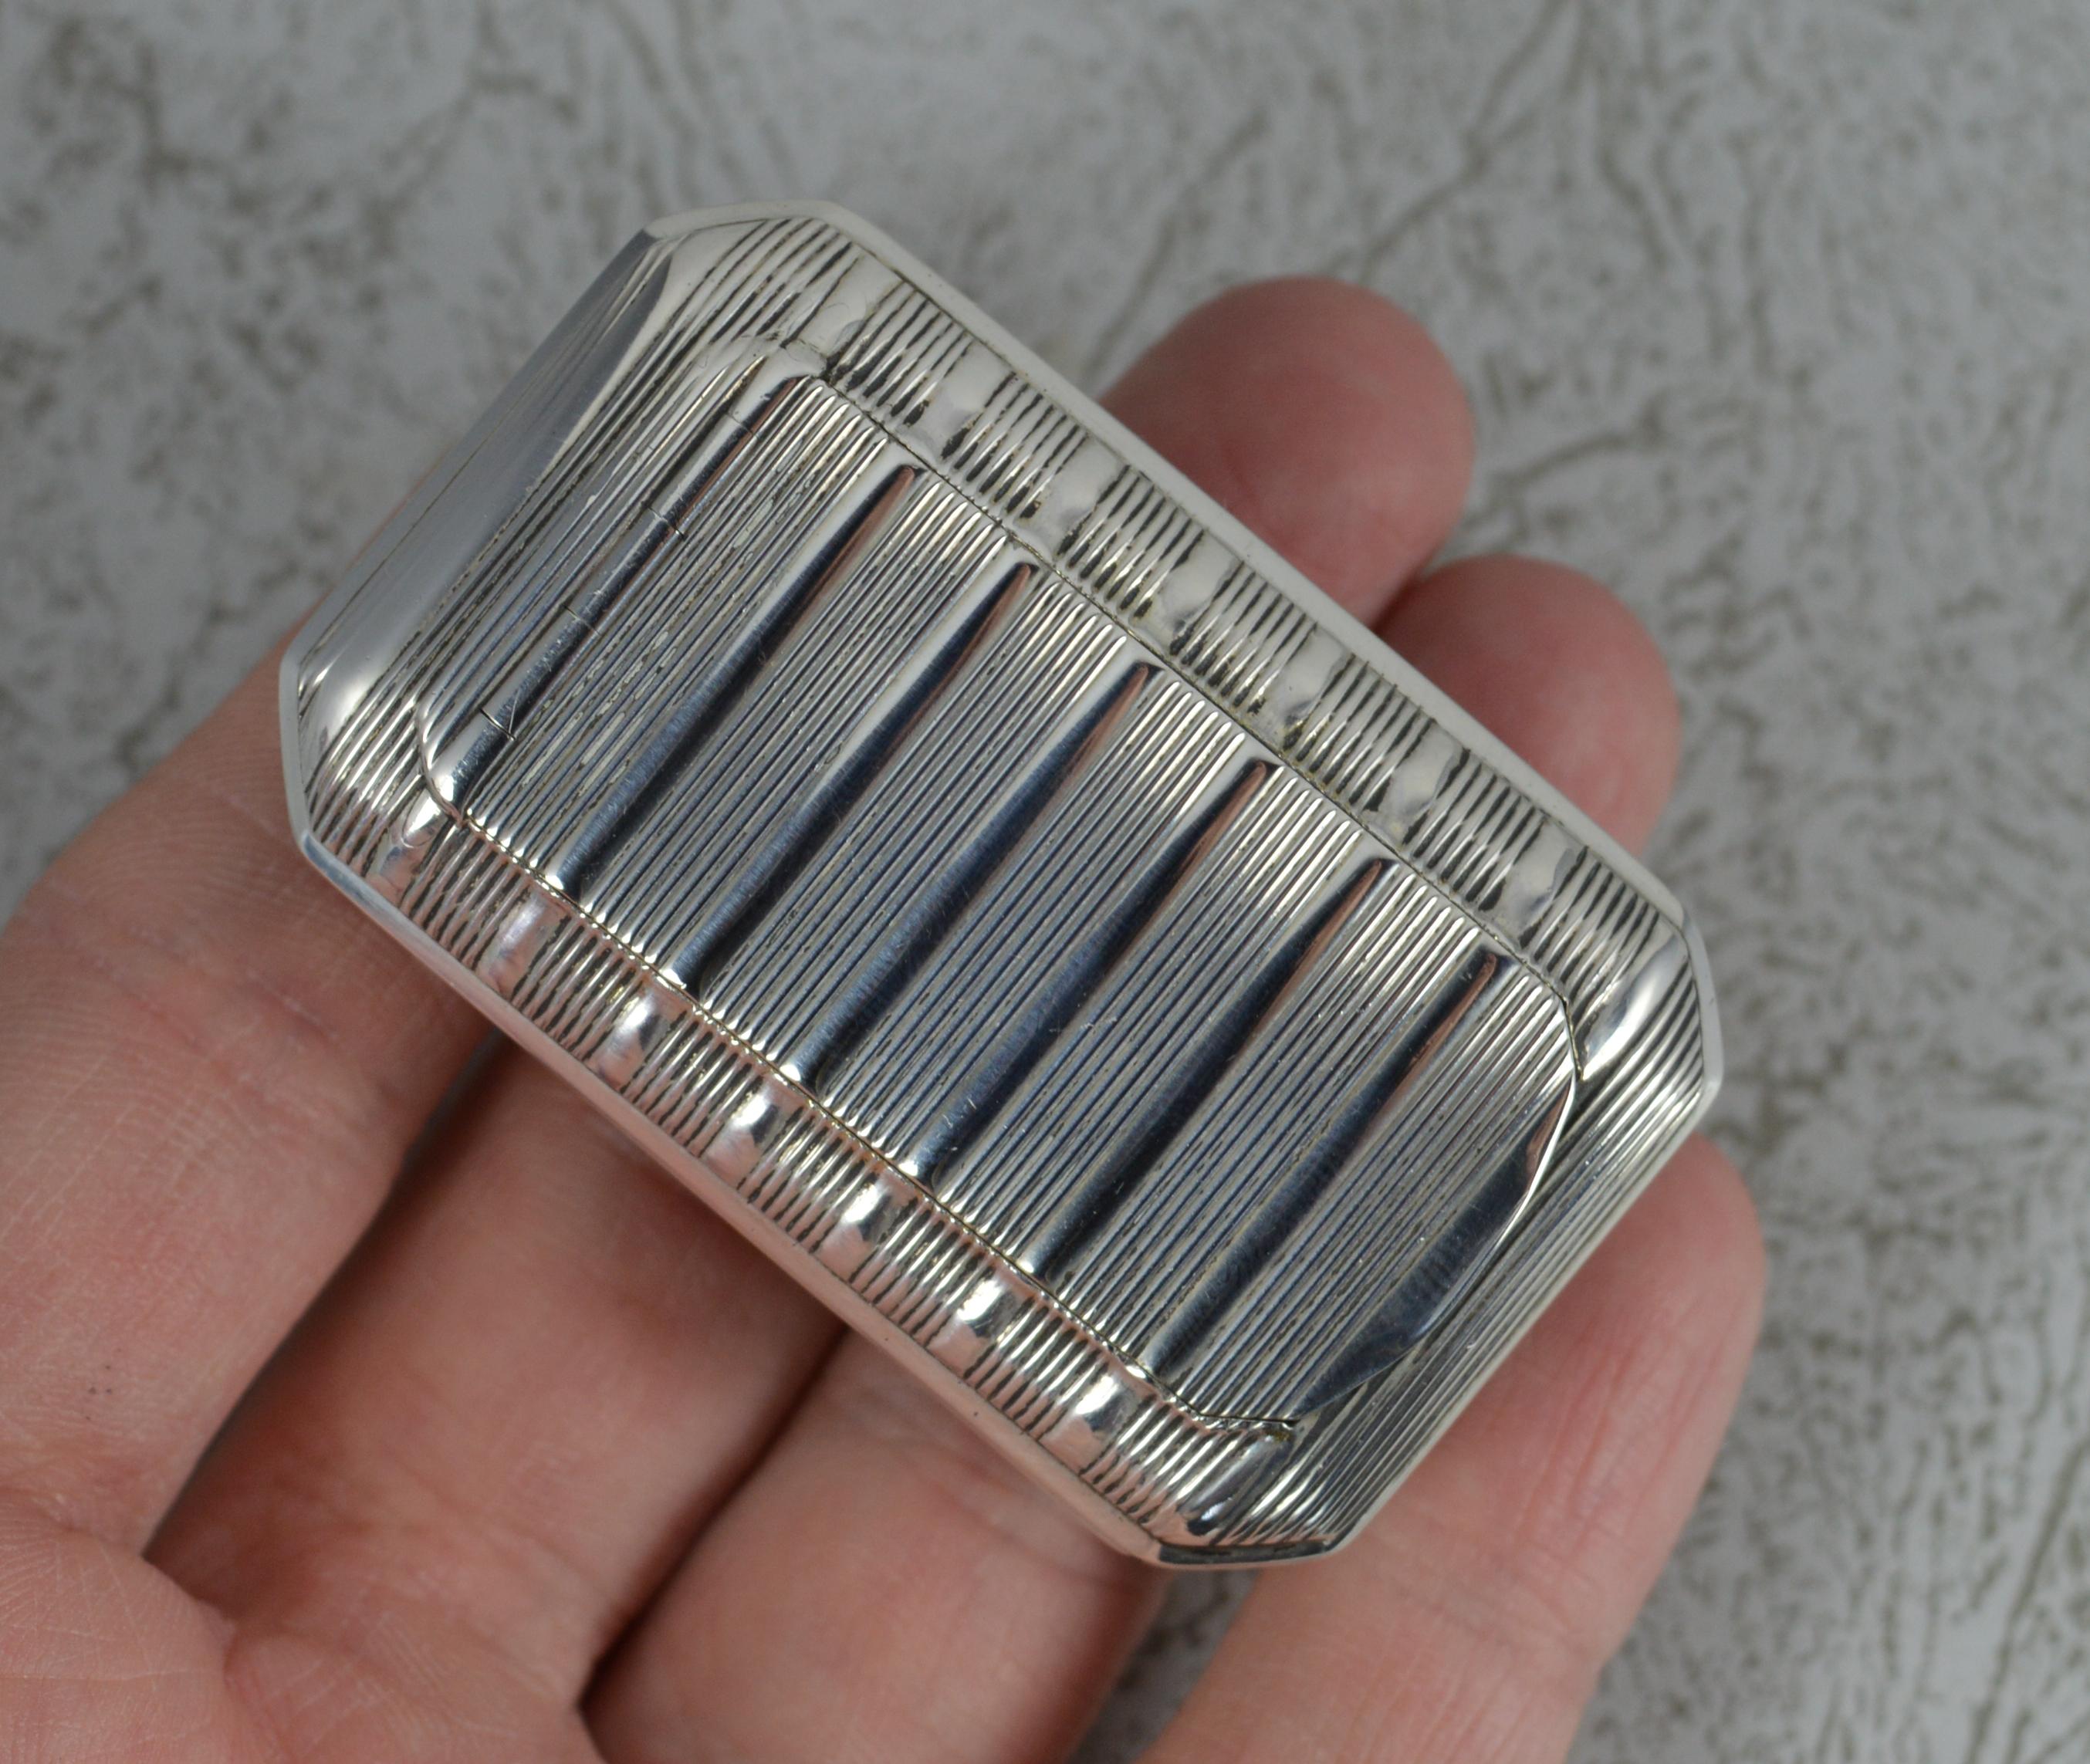 A beautiful solid silver snuff box.
George III period, English made.
Good gauge, shape and size.
Ridged finish throughout the rectangular shape. Bright gilt interior.

Hallmarks ; full hallmarks to edge of lid
Weight ; 29.2 grams
Size ; 3.5cm x